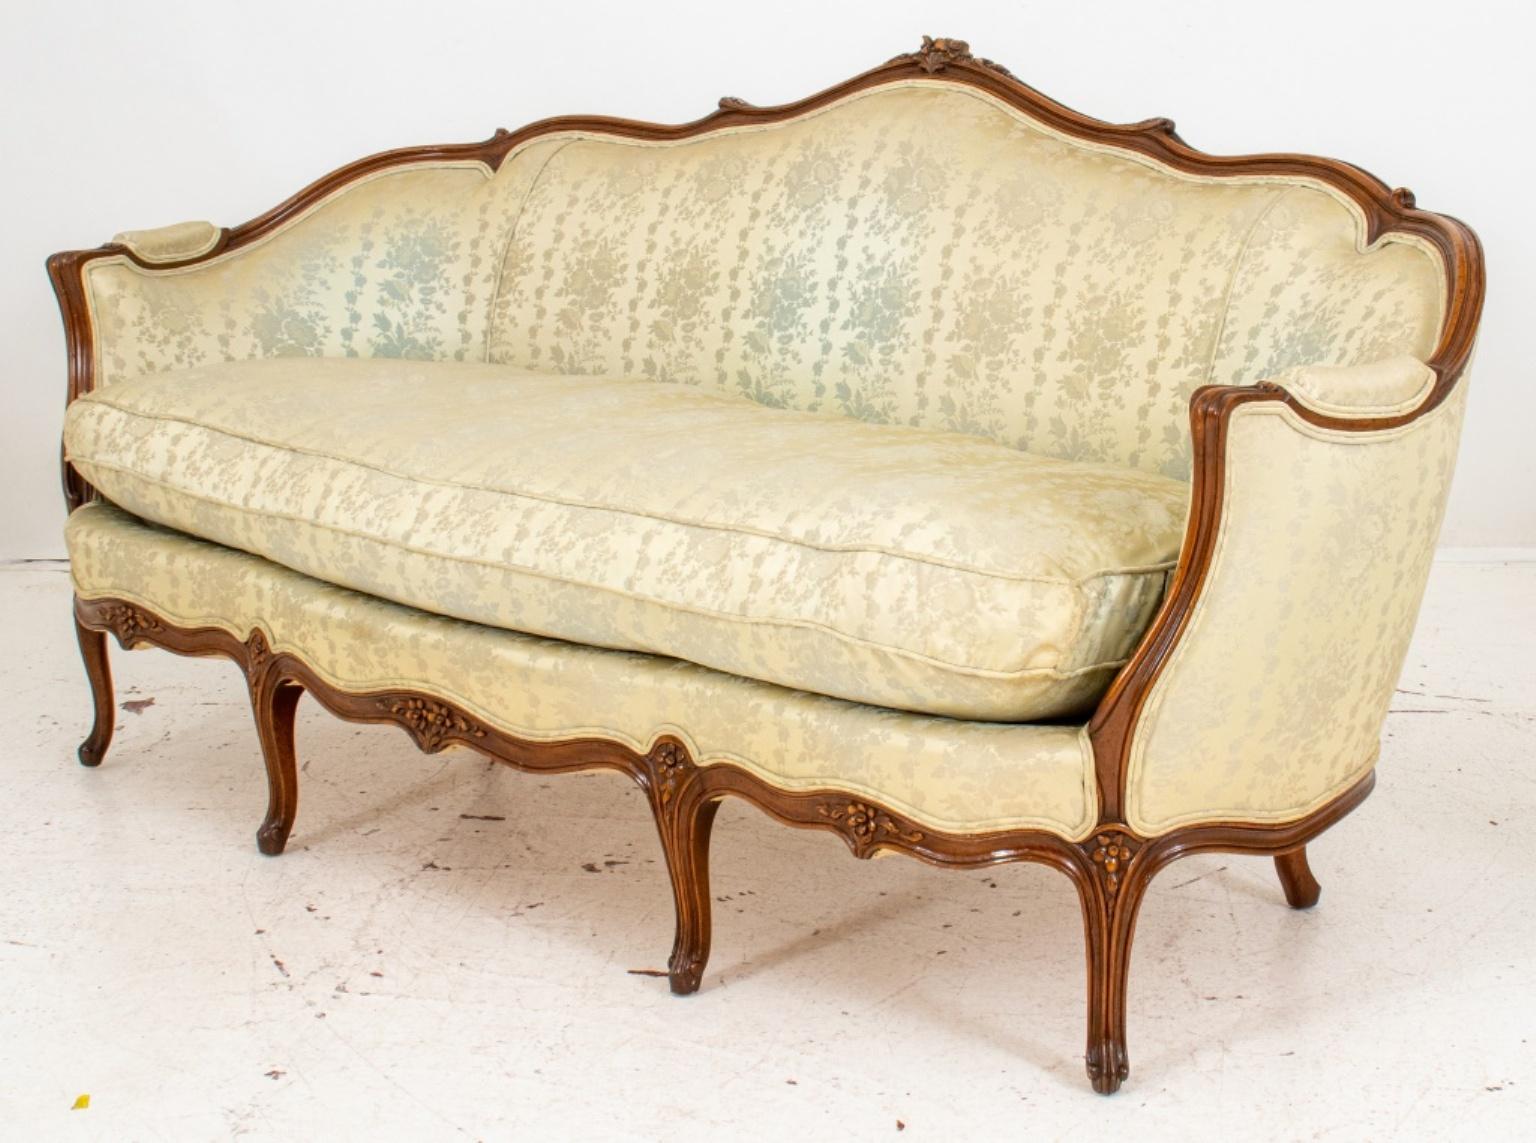 French Louis XV Rococo style sofa or settee, the fruitwood scrolling back rest with floral carvings, downswept arms and shaped seat with one above cabriole legs, upholstered in beige silky damask.

Dimensions: 34.5